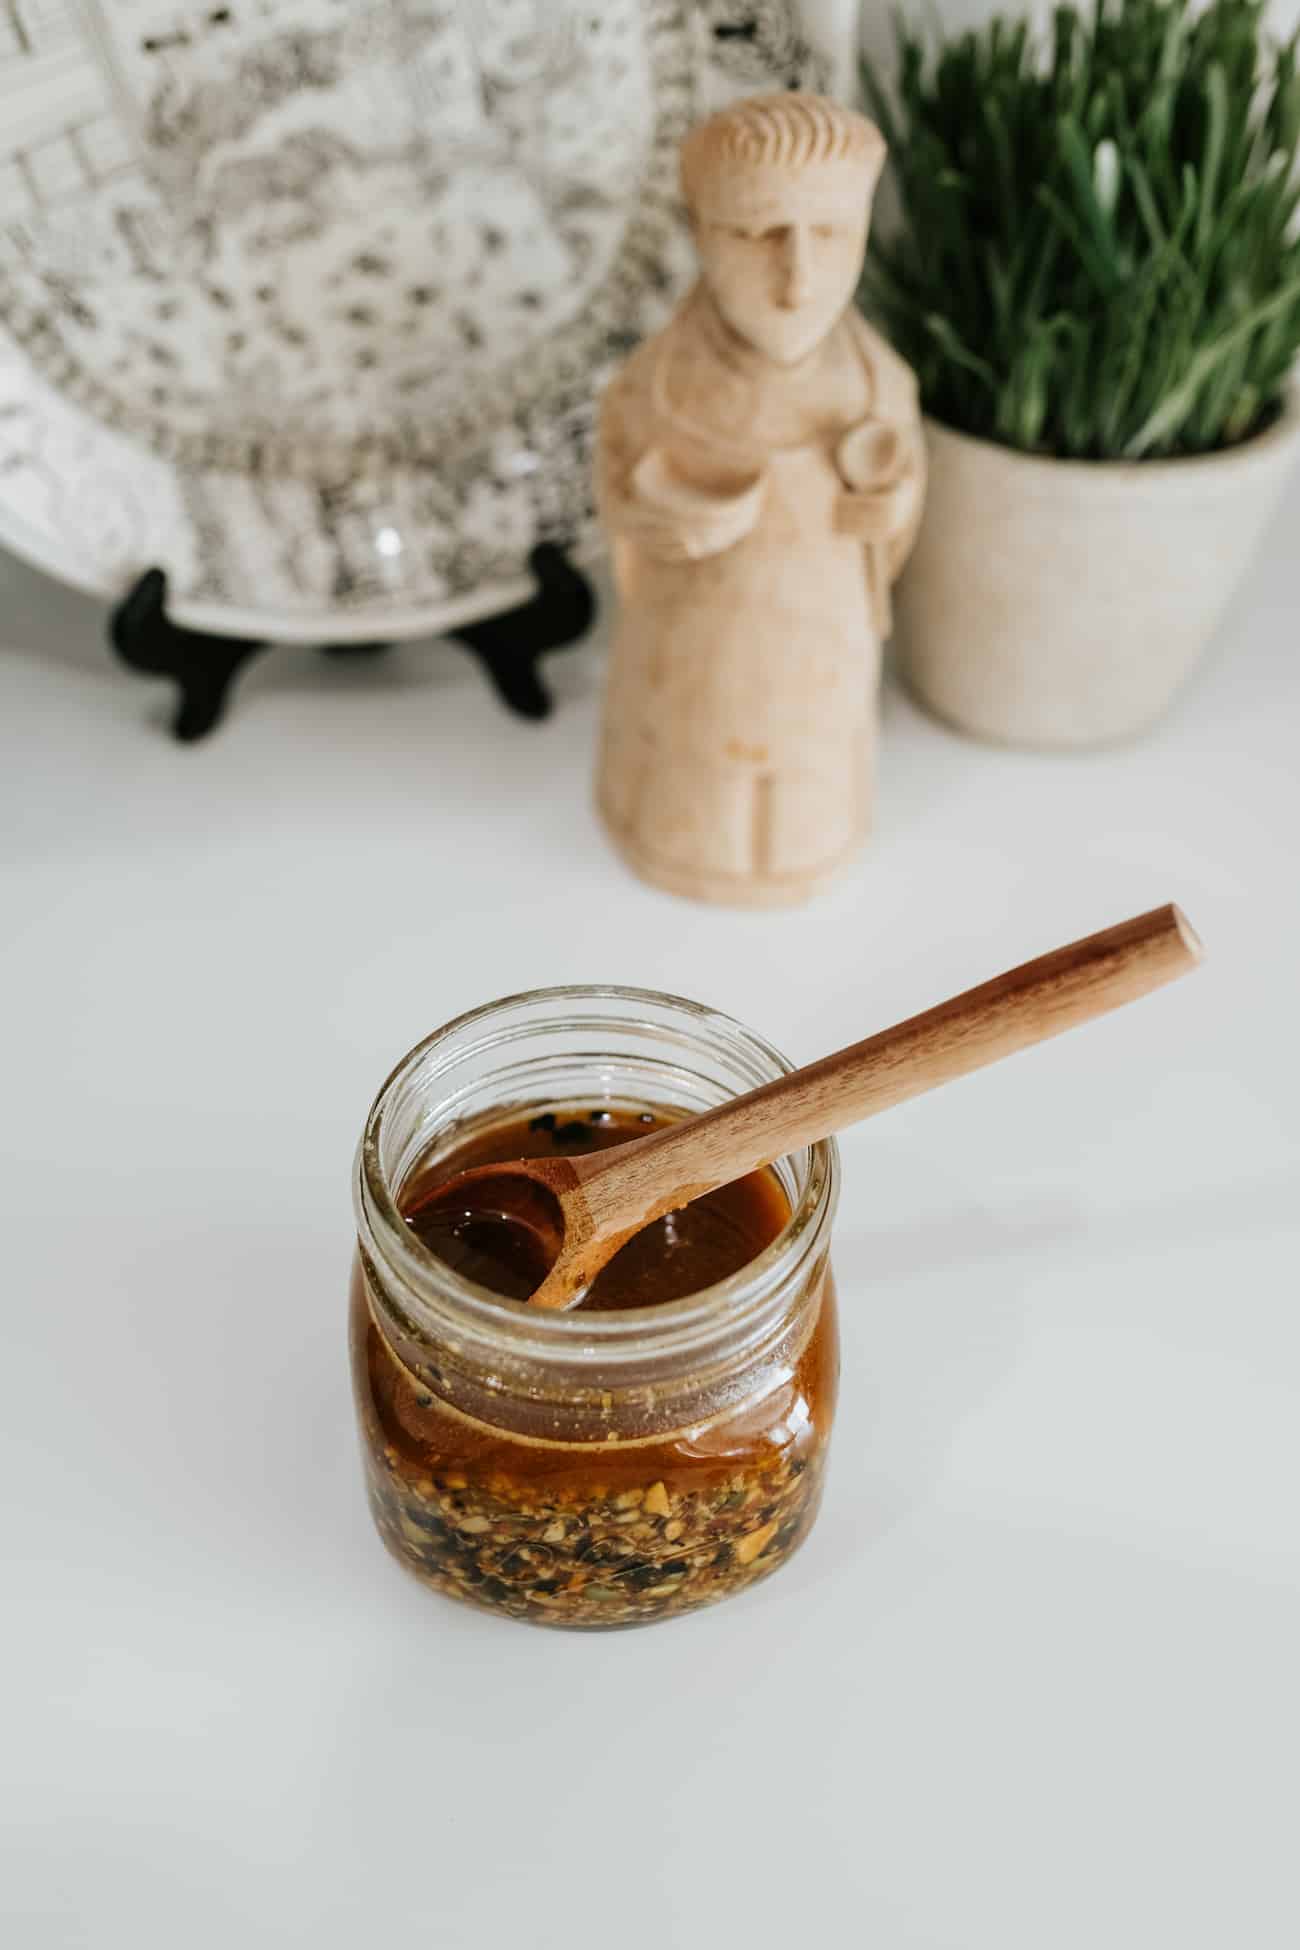 small mason jar of salsa macha with a wooden condiment spoon, with a small terracotta statue of a man in the background.